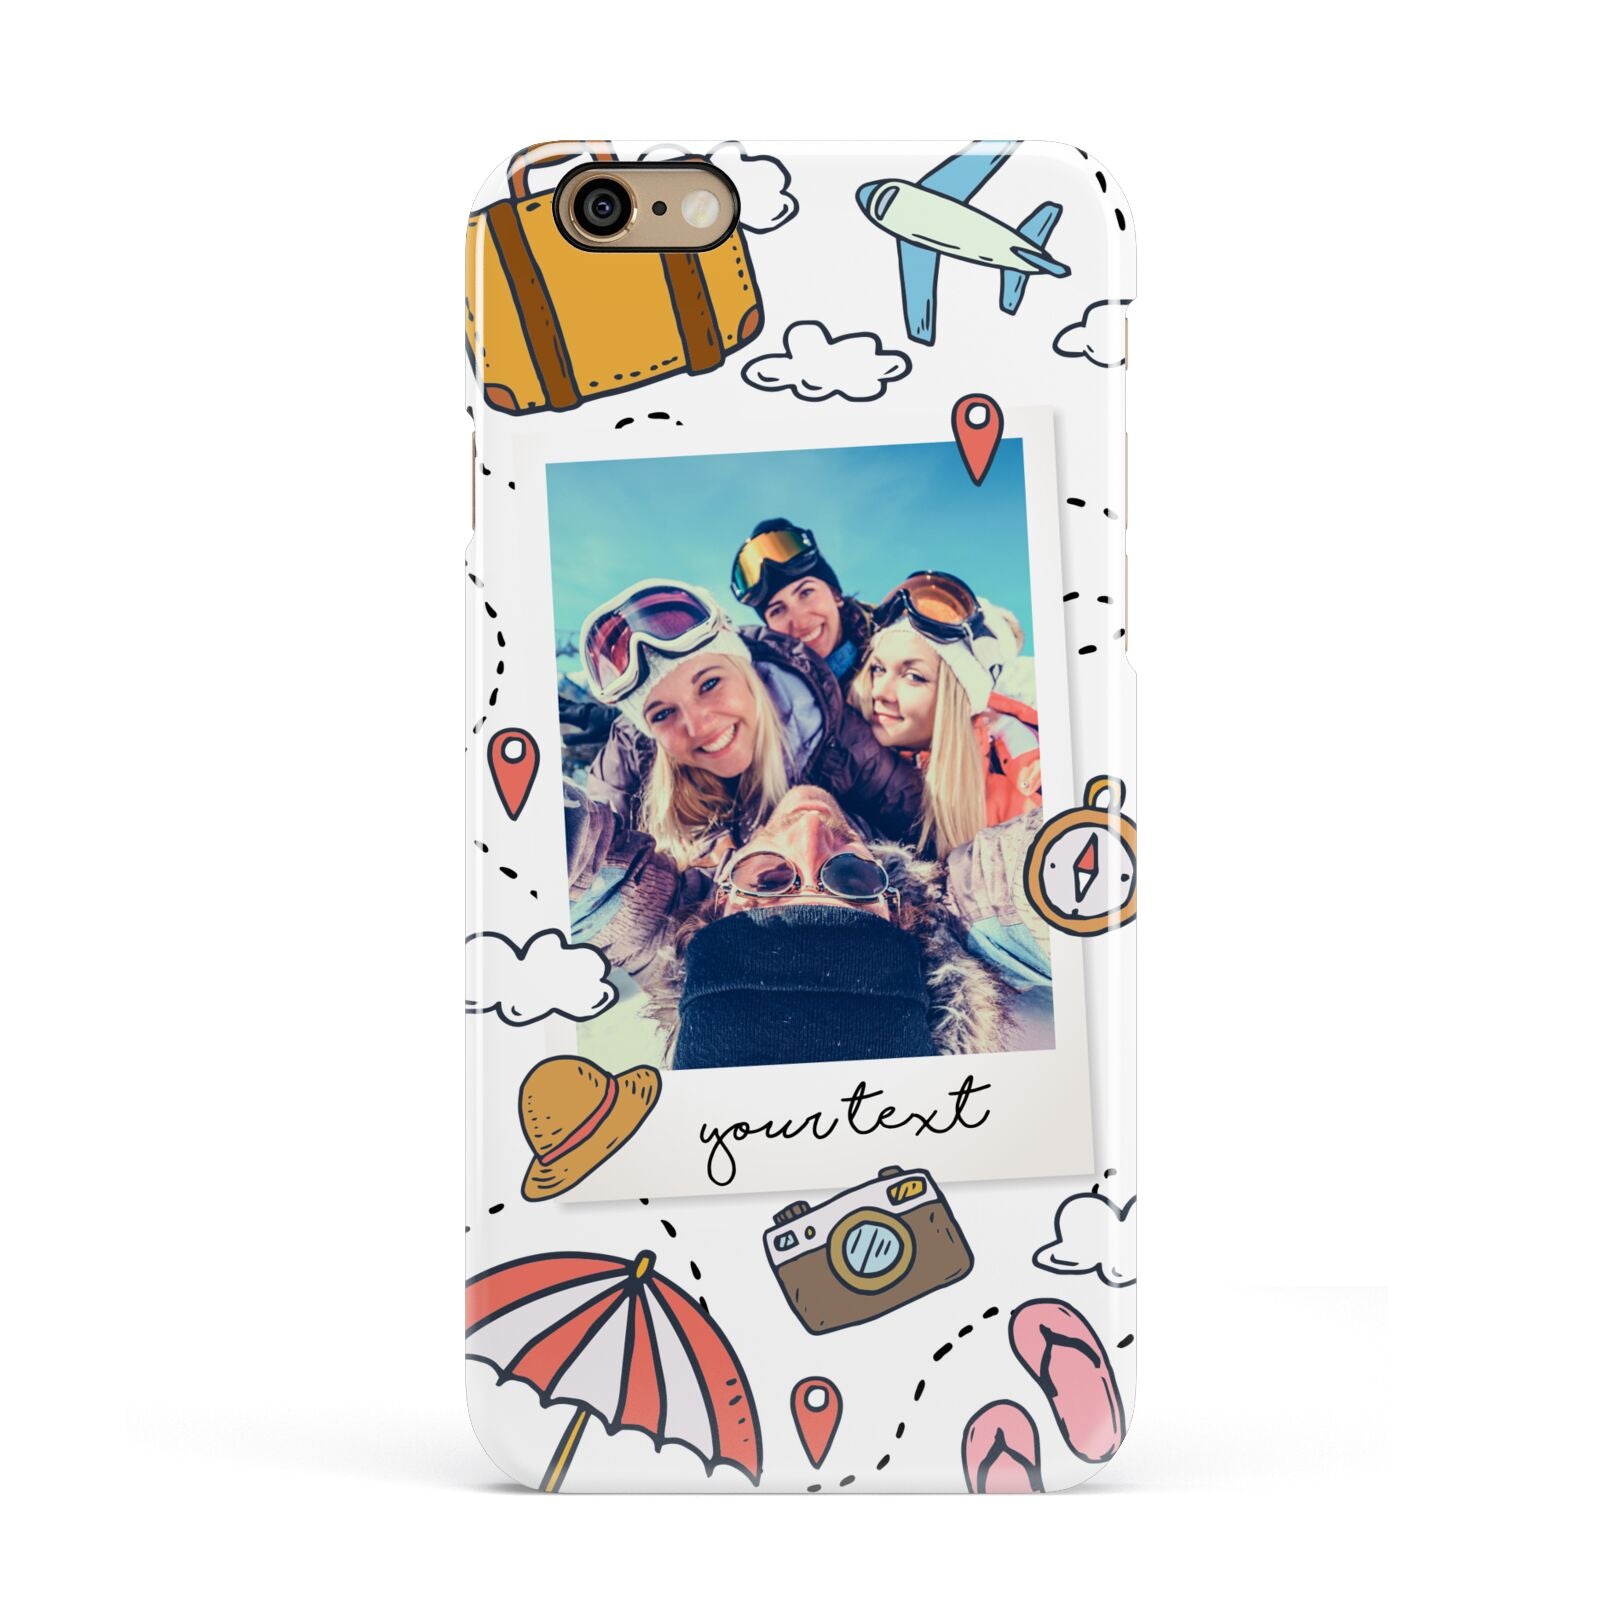 Personalised Photo Holiday Apple iPhone 6 3D Snap Case